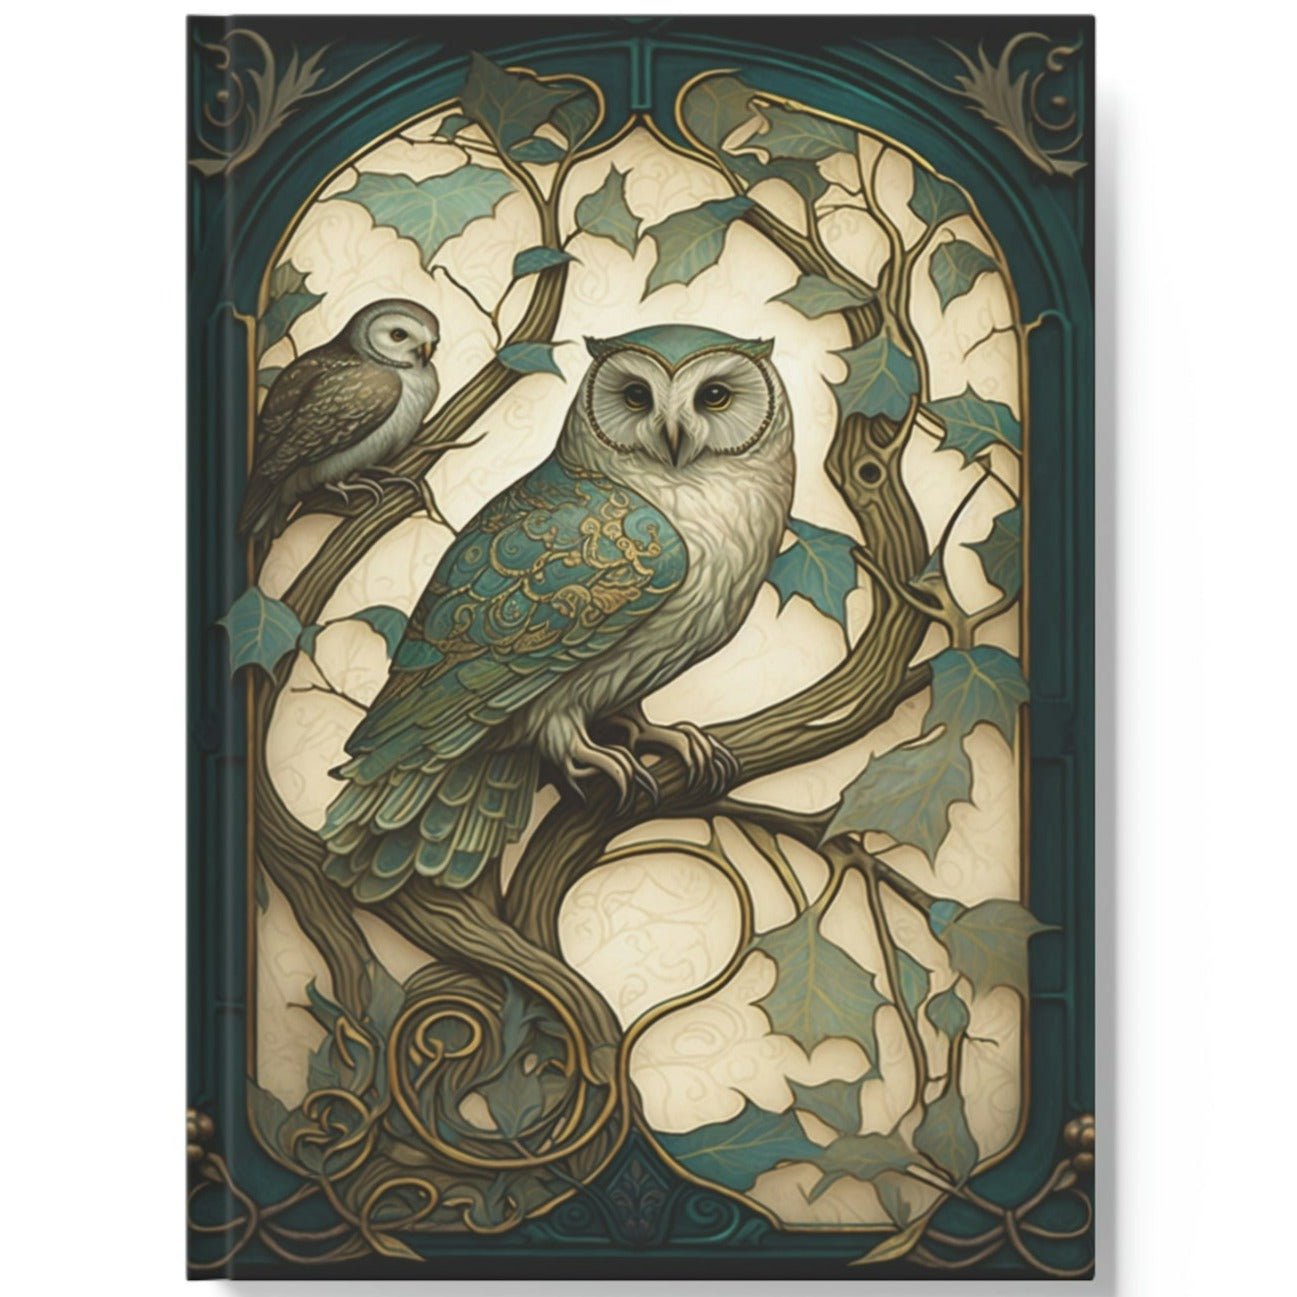 Owl Inspirations - Turquois Owl - Hard Backed Journal